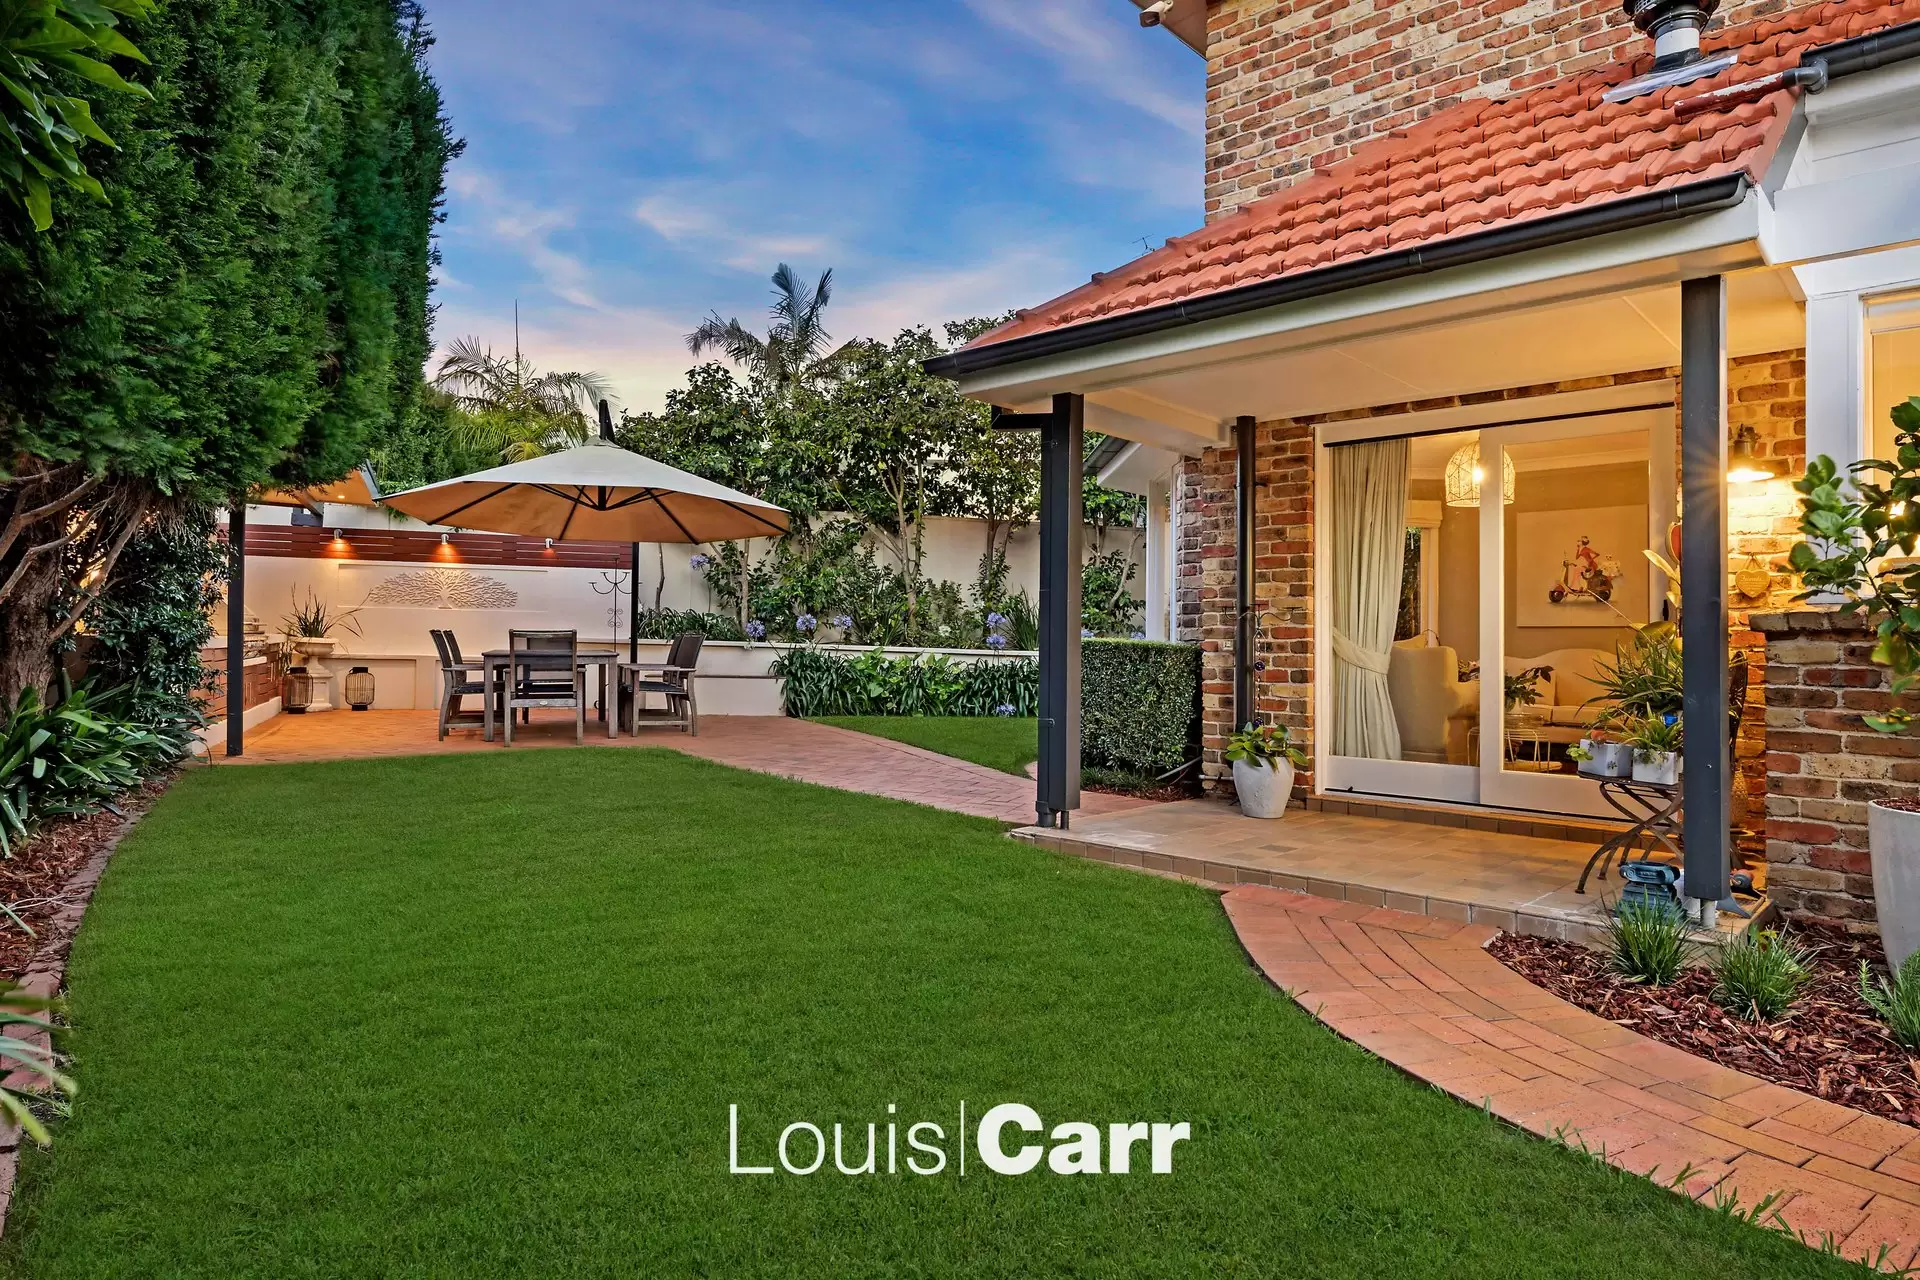 Photo #6: 7 Golders Green Way, Glenhaven - Sold by Louis Carr Real Estate